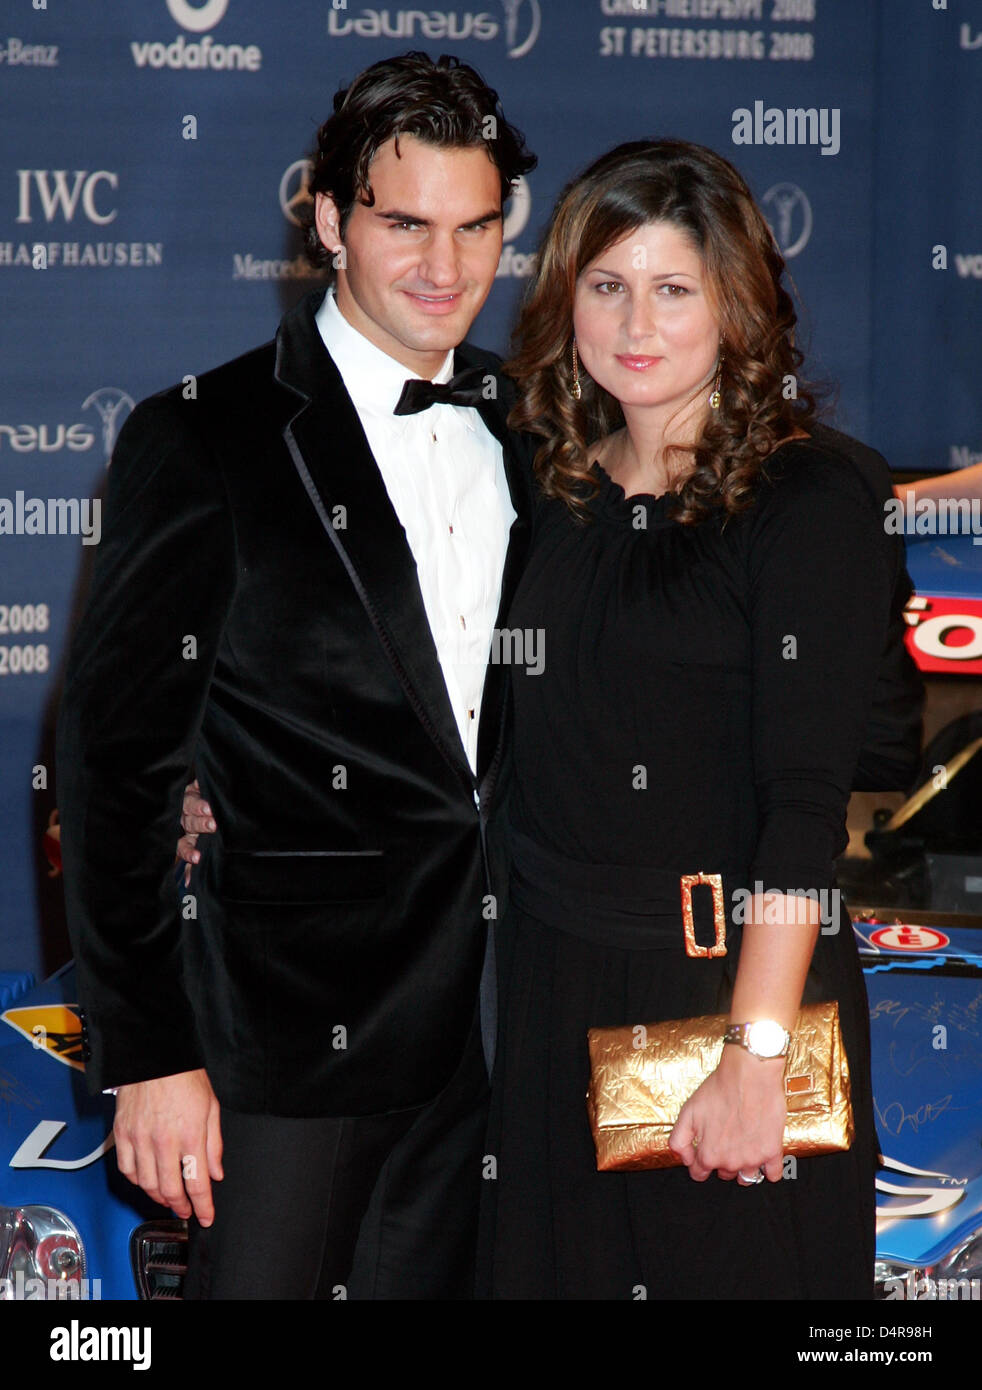 (dpa file) A file picture 18 February 2008 captures Swiss tennis champion Roger Federer (L) and his wife Mirka Vavrinec (R) arriving at the Laureus World Sports Awards 2008 in St. Petersburg, Russia. On 23 July 2009, the couple announced Mirka gave birth to twin girls Charlene Riva and Myla Rose and state ?This is the most wonderful day of our lives. Mirka, Myla and Charlene are al Stock Photo